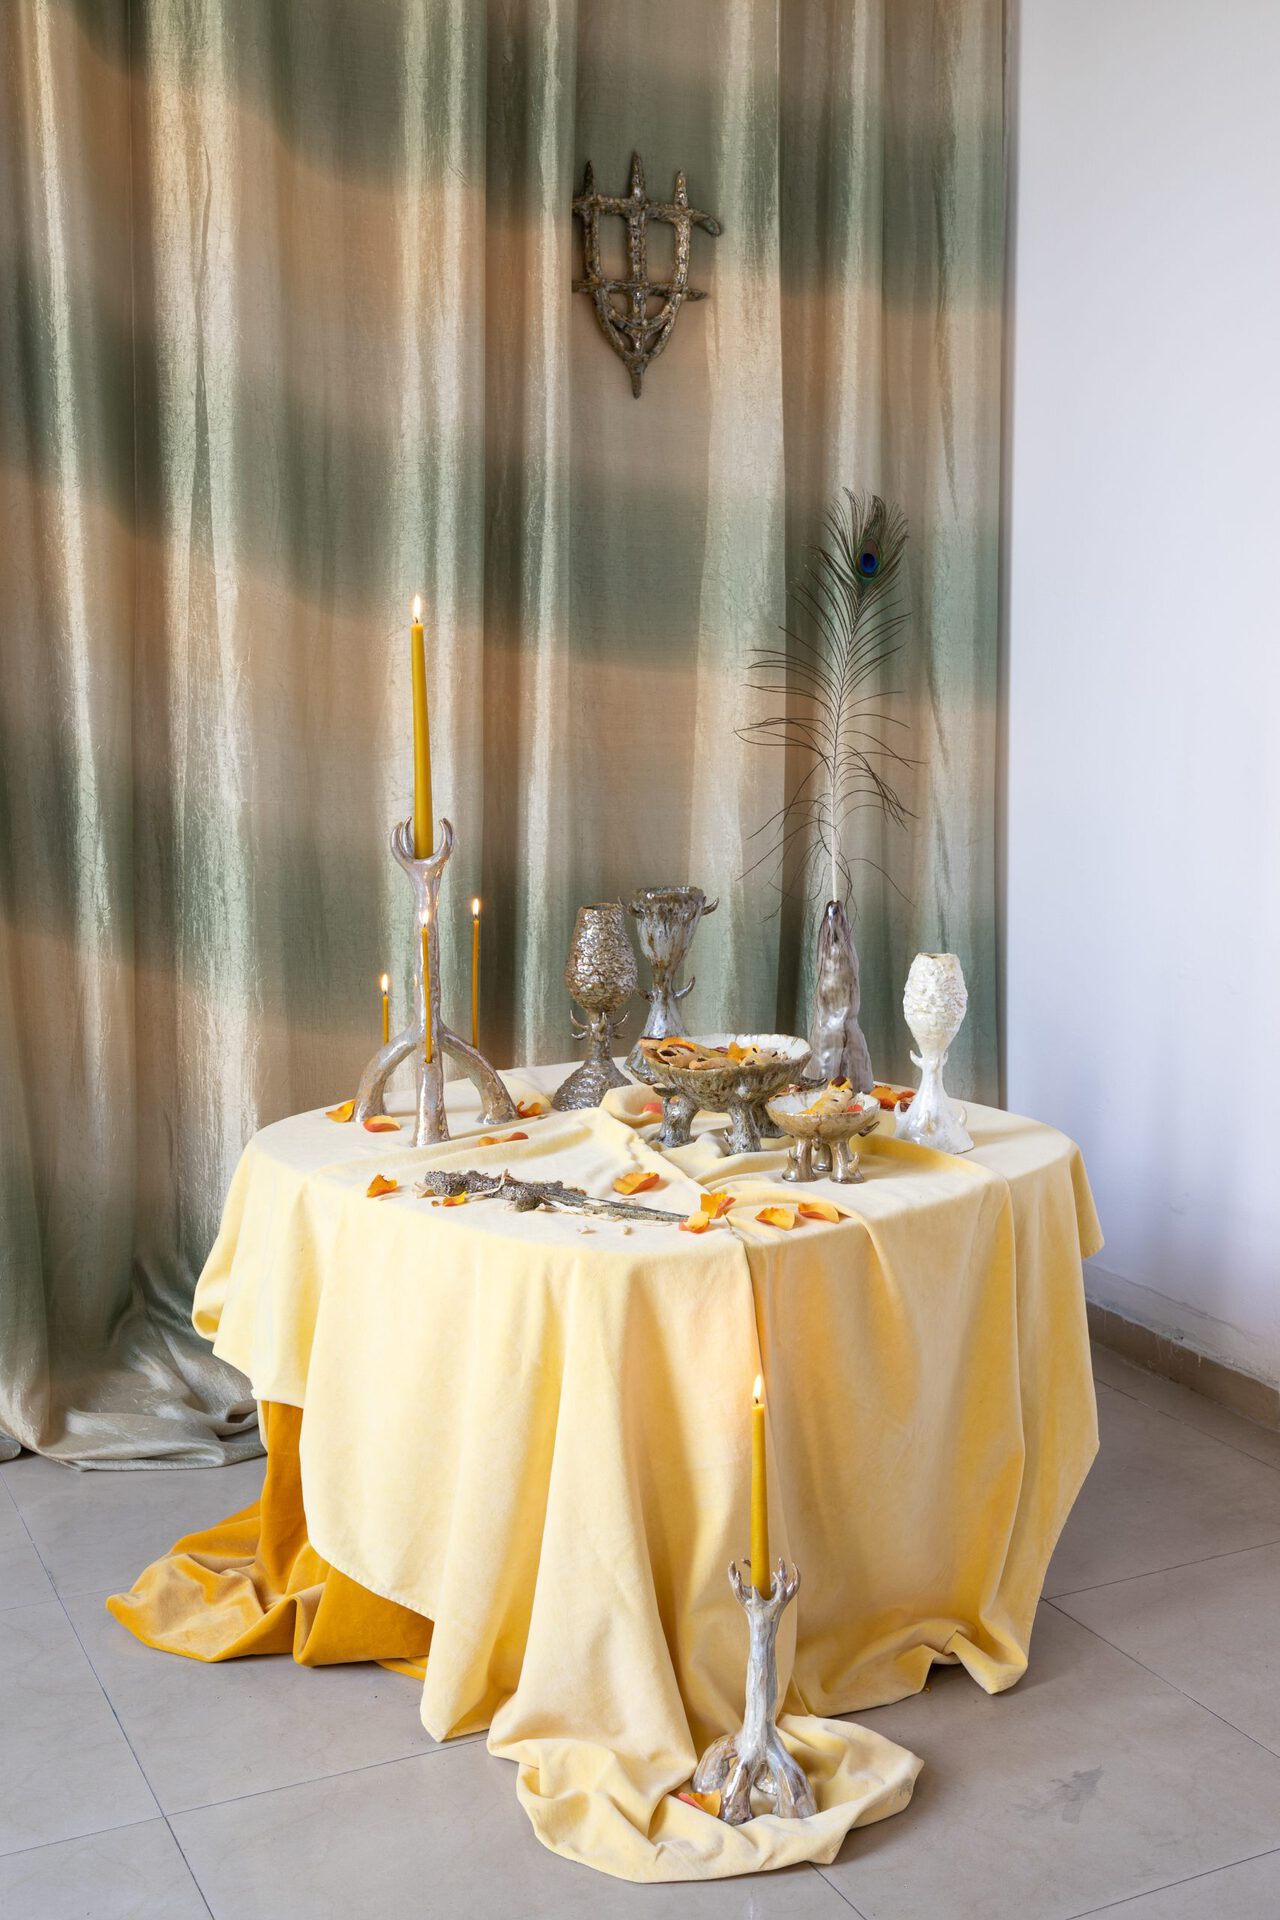 Aleksandra Liput, „Witchcraft treats”, 2021, installation, textiles, ceramics, cookies, rose pettles, candles, peacock feather, photo. meta_strong_fiction